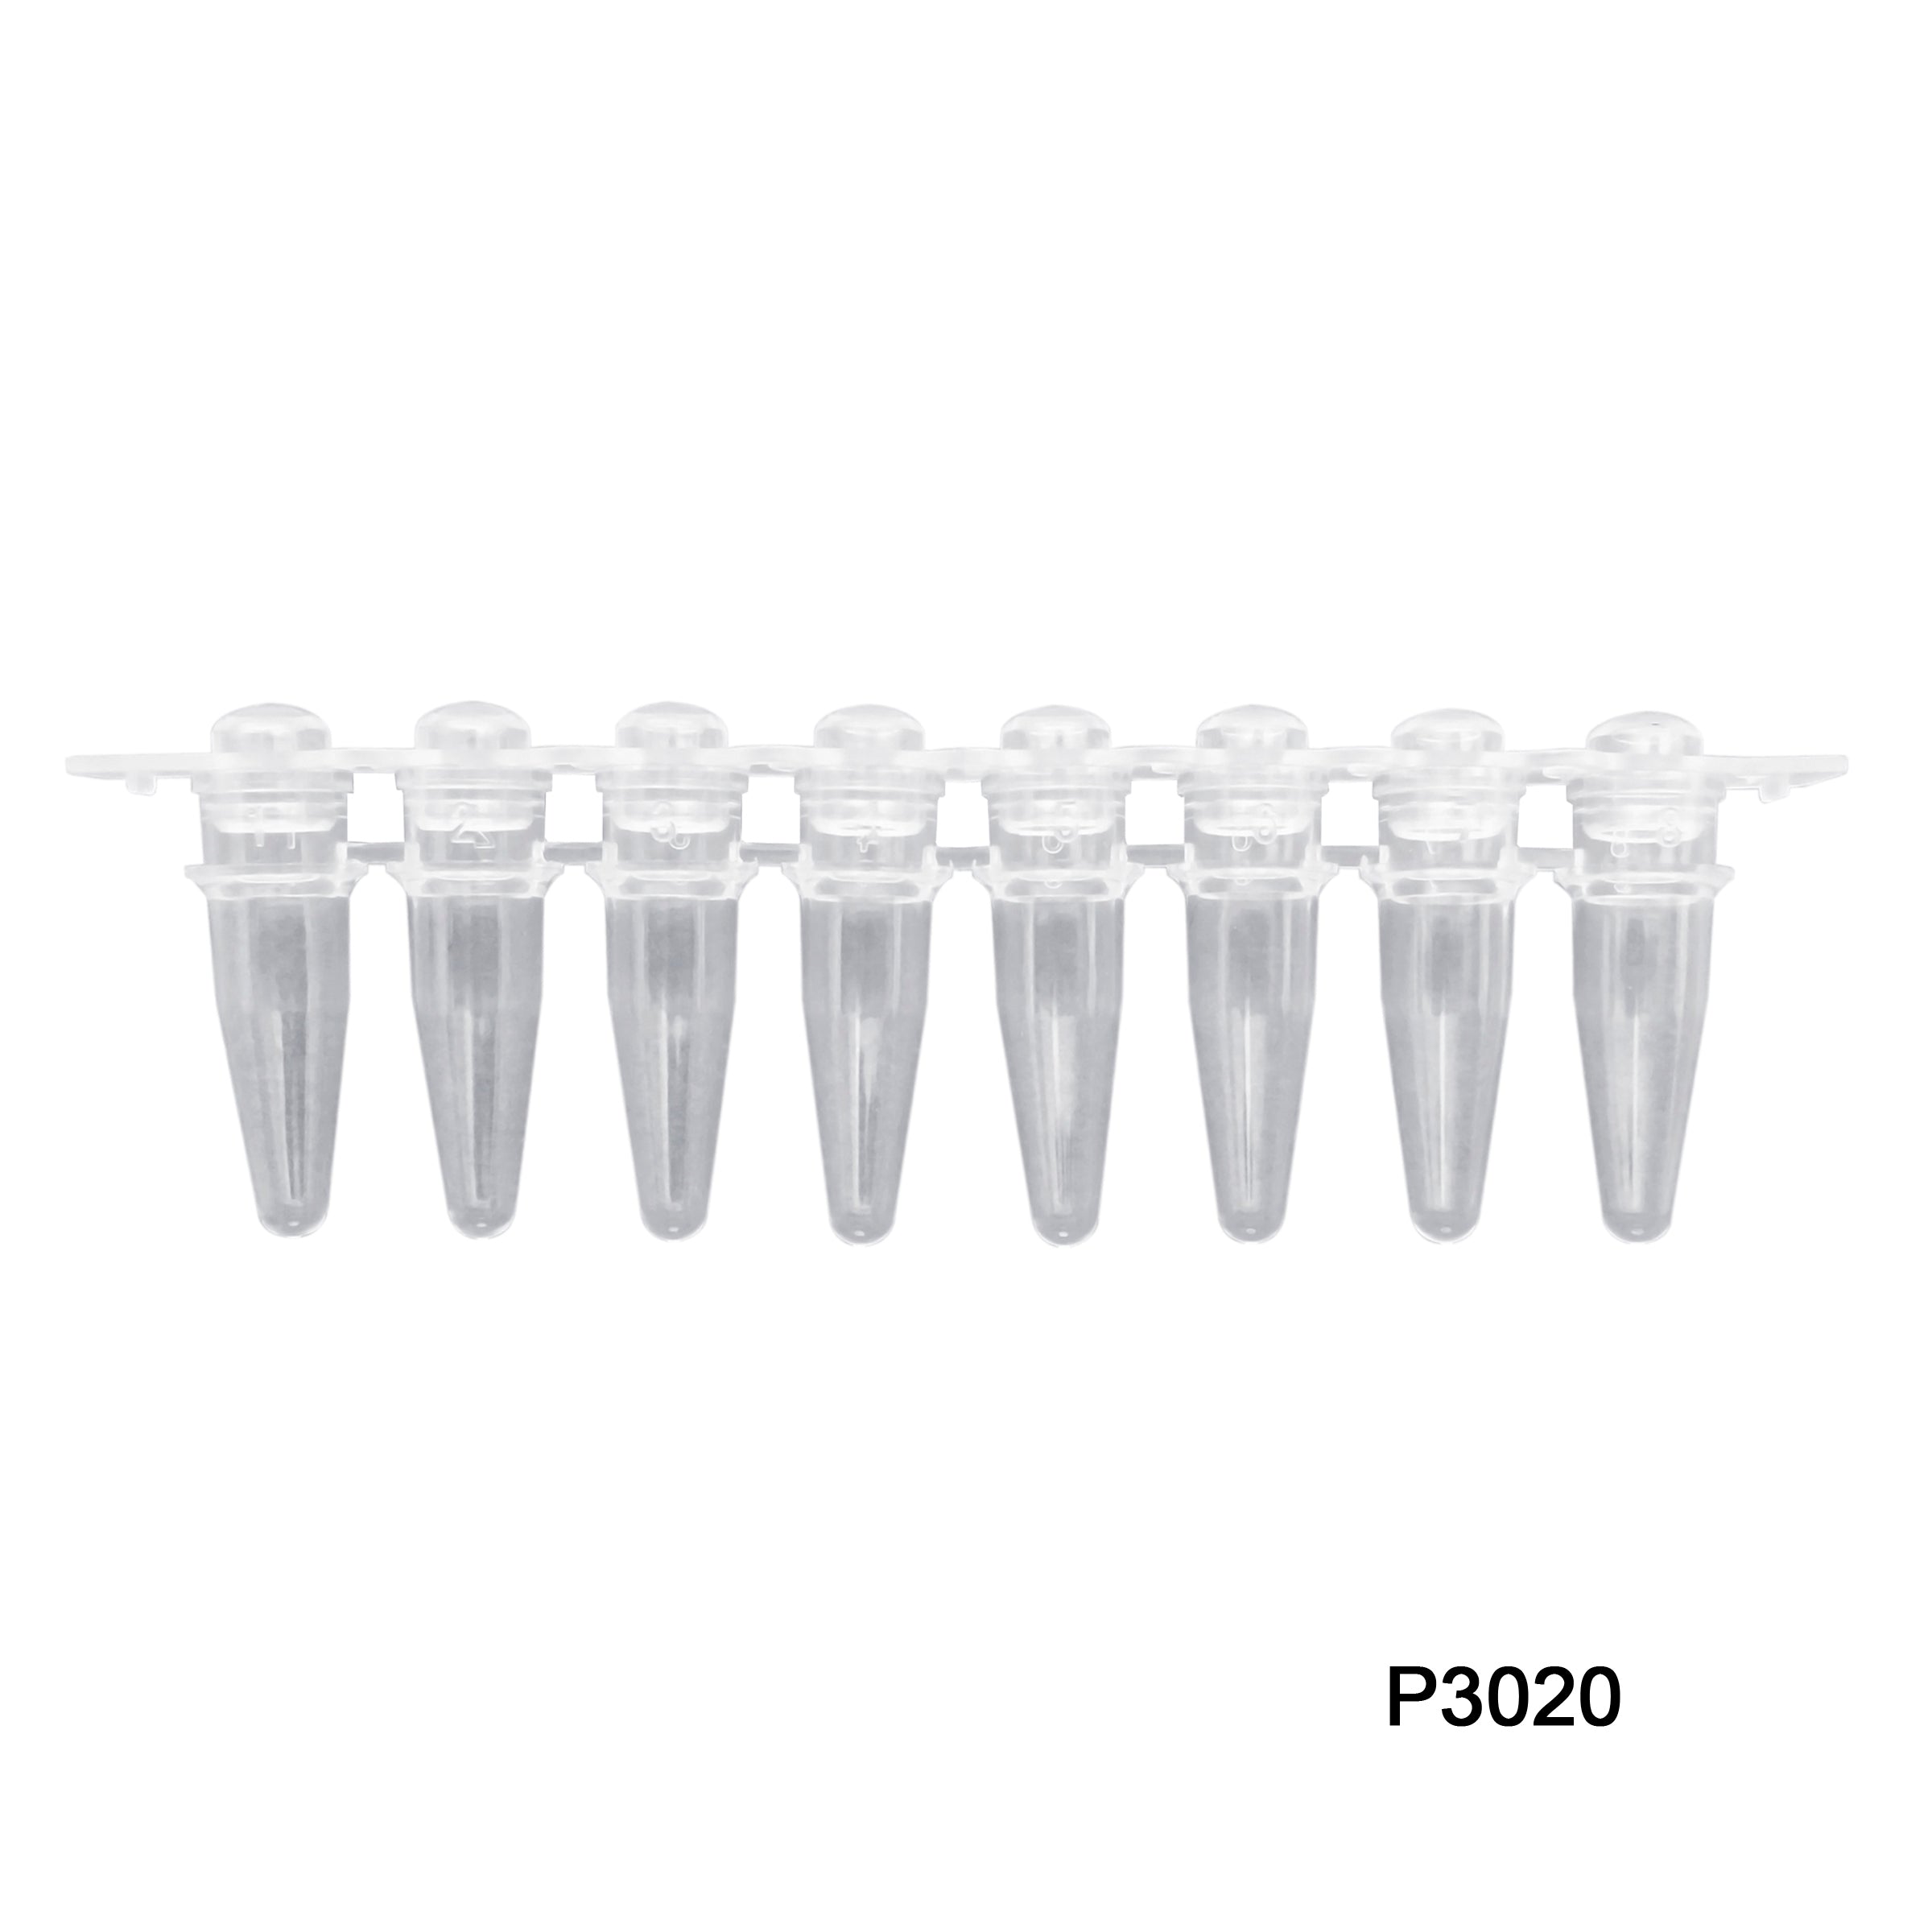 MTC Bio P3020, PCR Tubes Strips of 8 Tubes with Dome Caps Packaged Separately, 120/pk